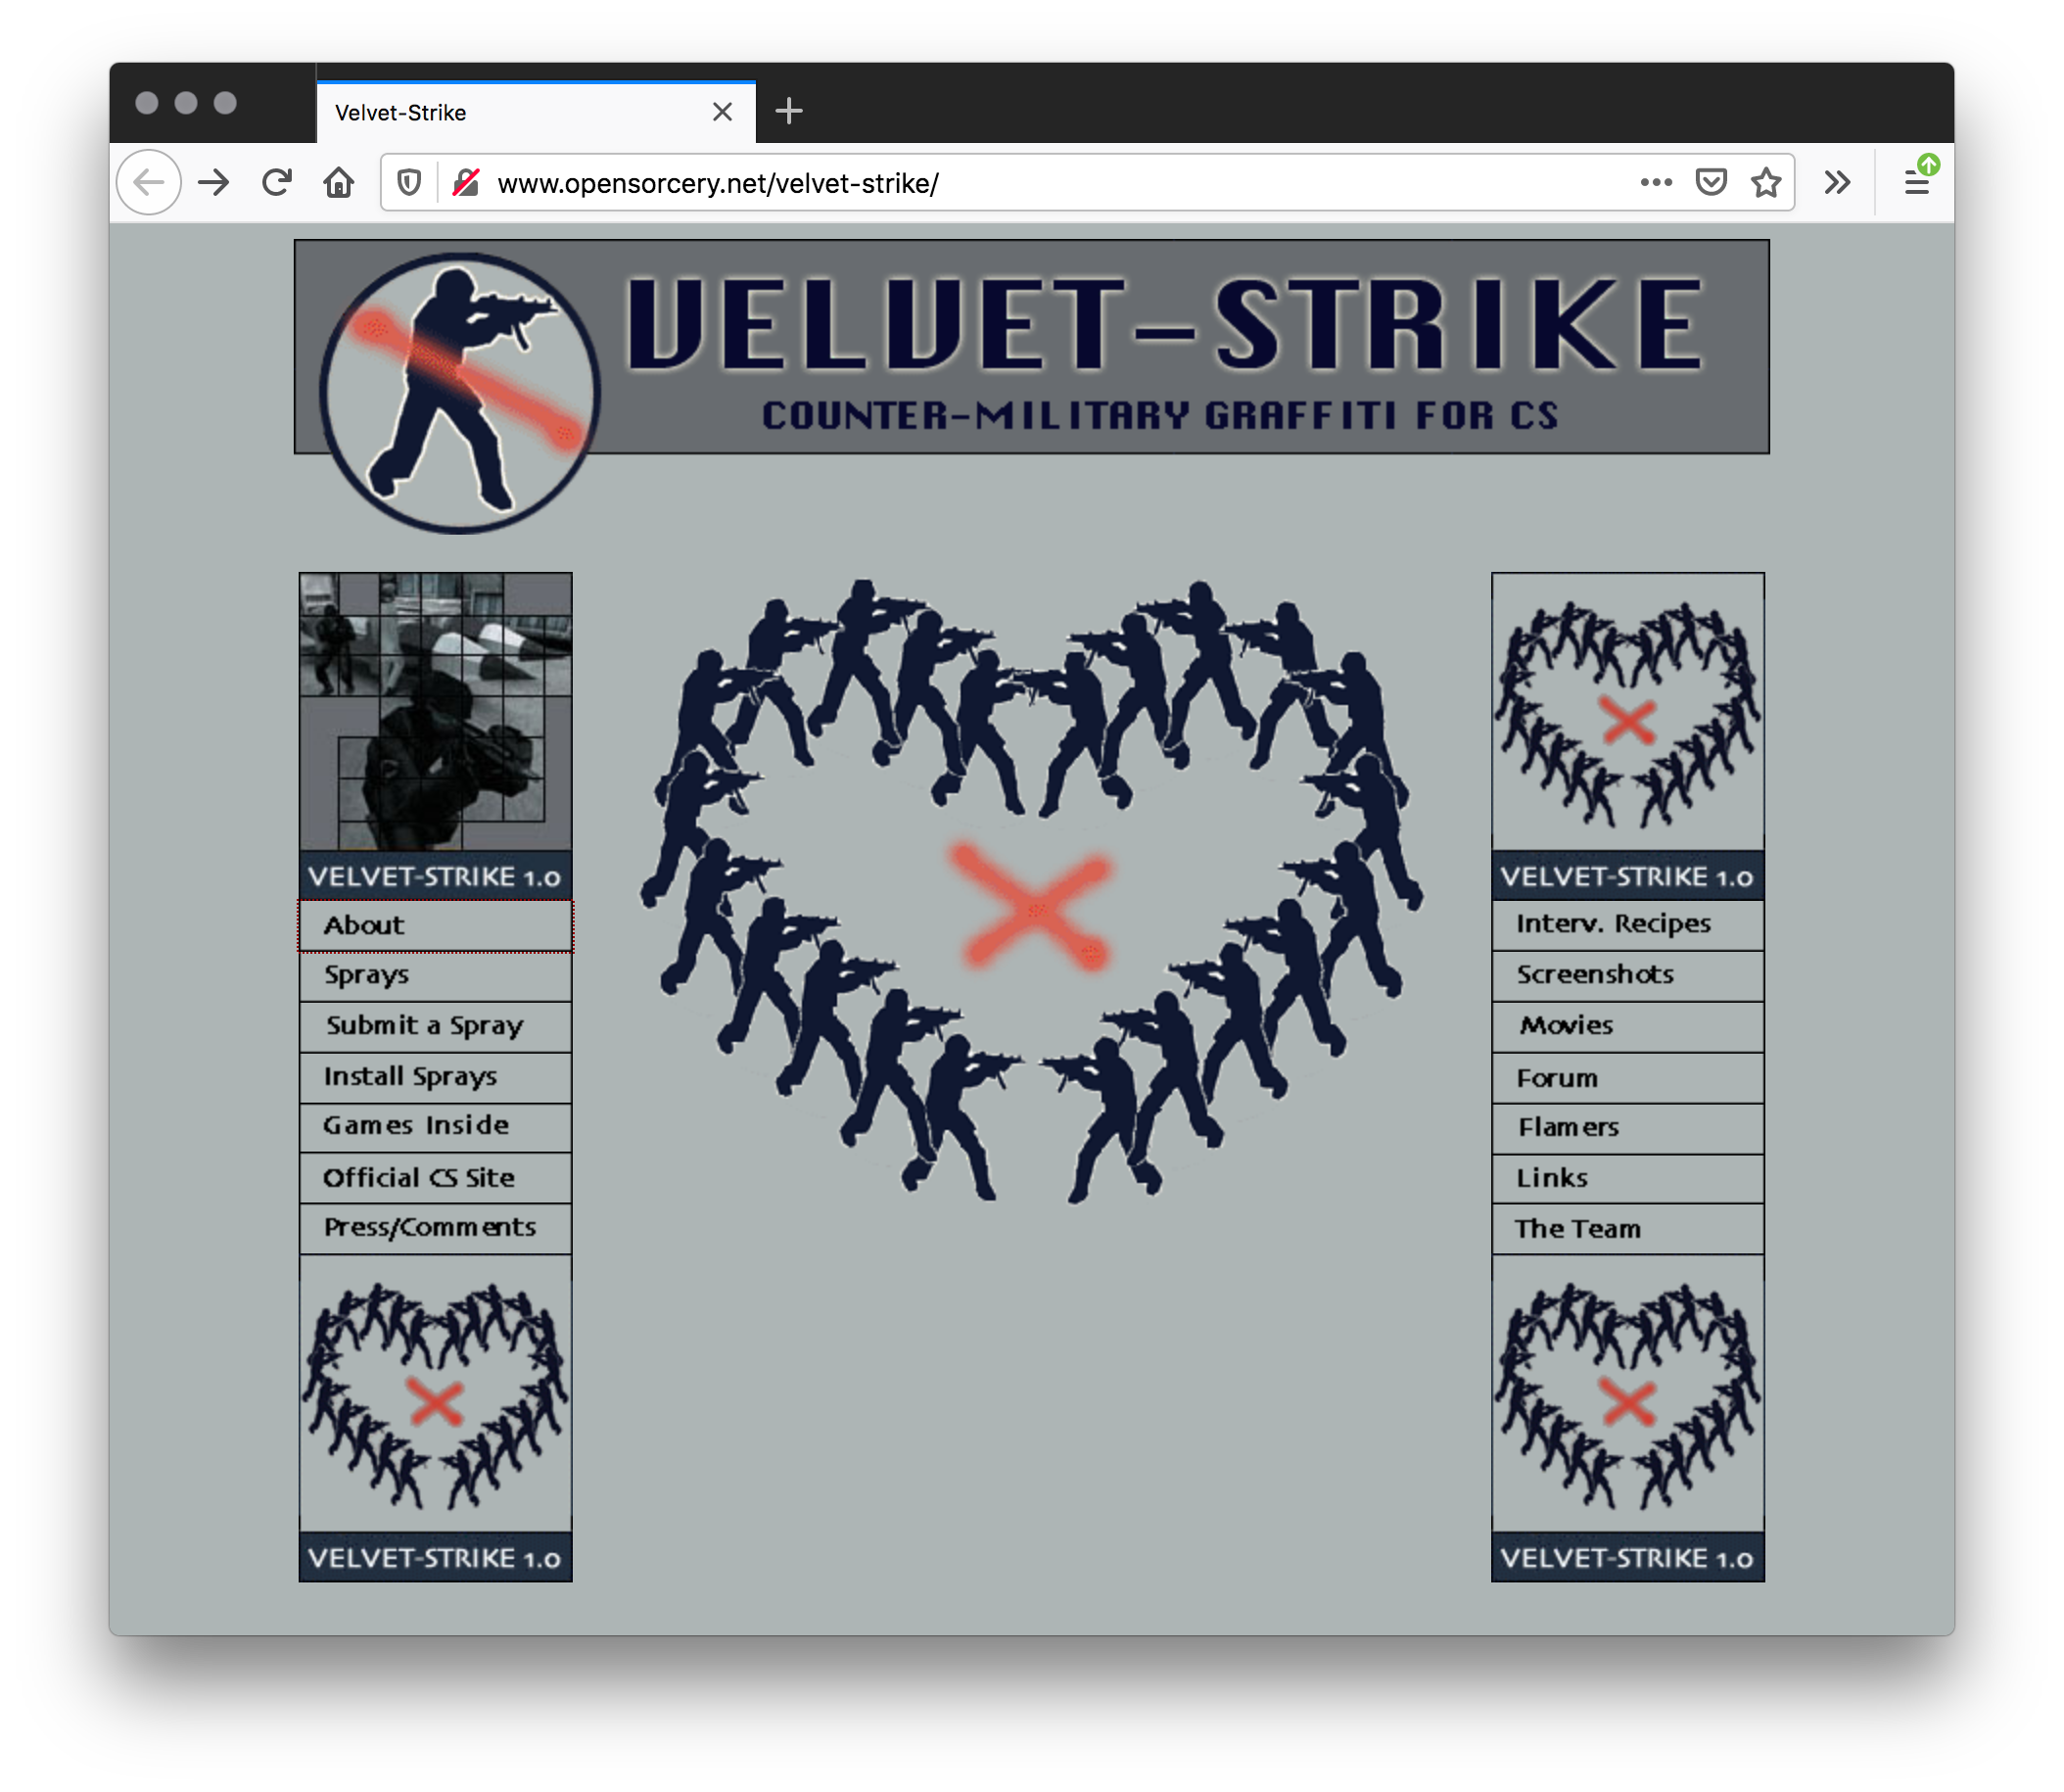 A grey webpage with two columns of text on both sides and a armed man crossed out by an orange graffitied line in a circle next to large text in the center. The center has a graphic of armed men forming a heart and a graffitied orange "x" inside.